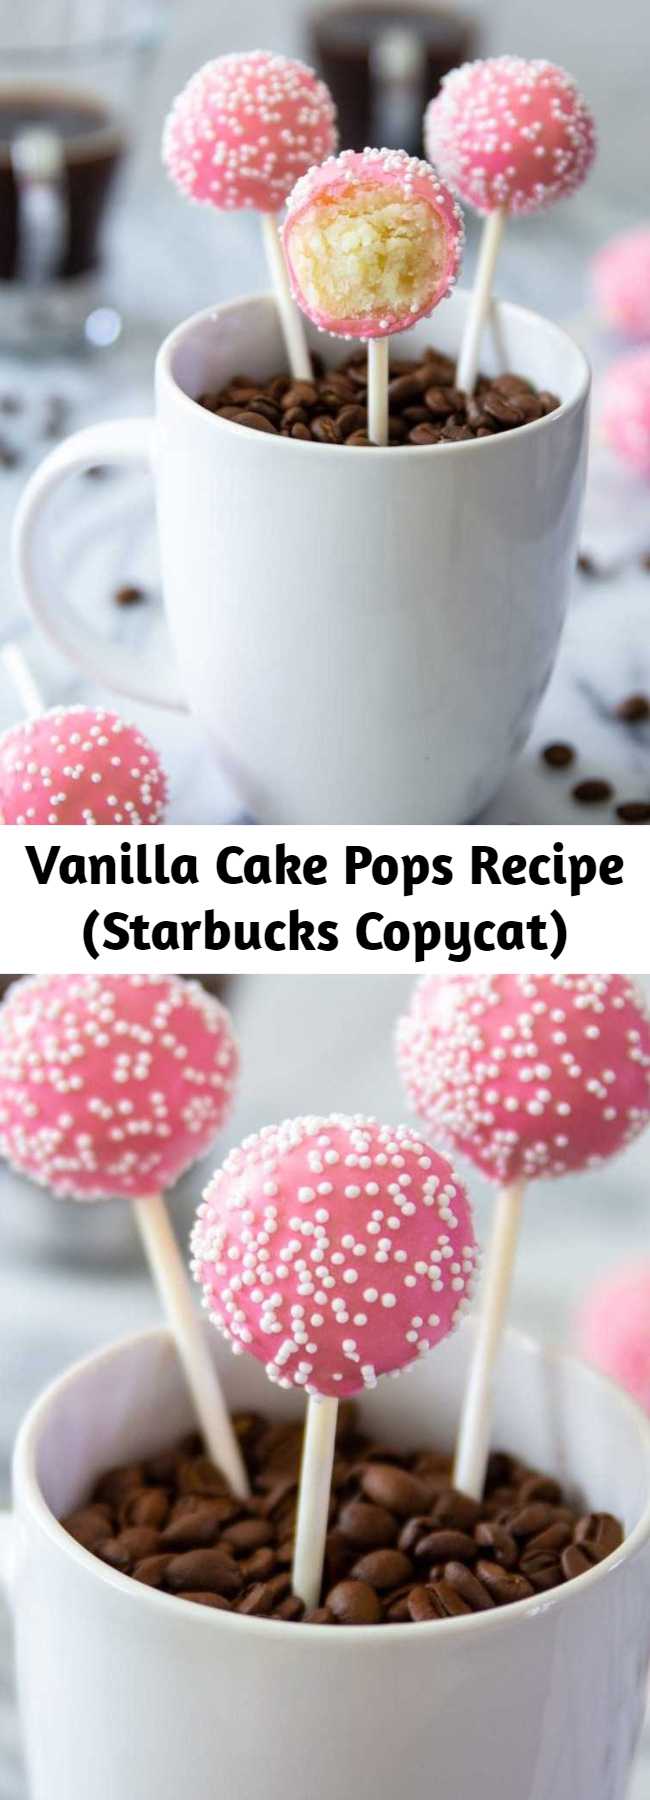 Vanilla Cake Pops Recipe (Starbucks Copycat) - This cake pops recipe is a copycat of Starbucks' birthday cake pop. This little treat is a combination of vanilla cake, frosting, and pink candy coating. The best foolproof cake pop recipe ever. #cakepops #vanillacakepops #starbuckscakepops #starbuckscopycat #bestcakepoprecipe